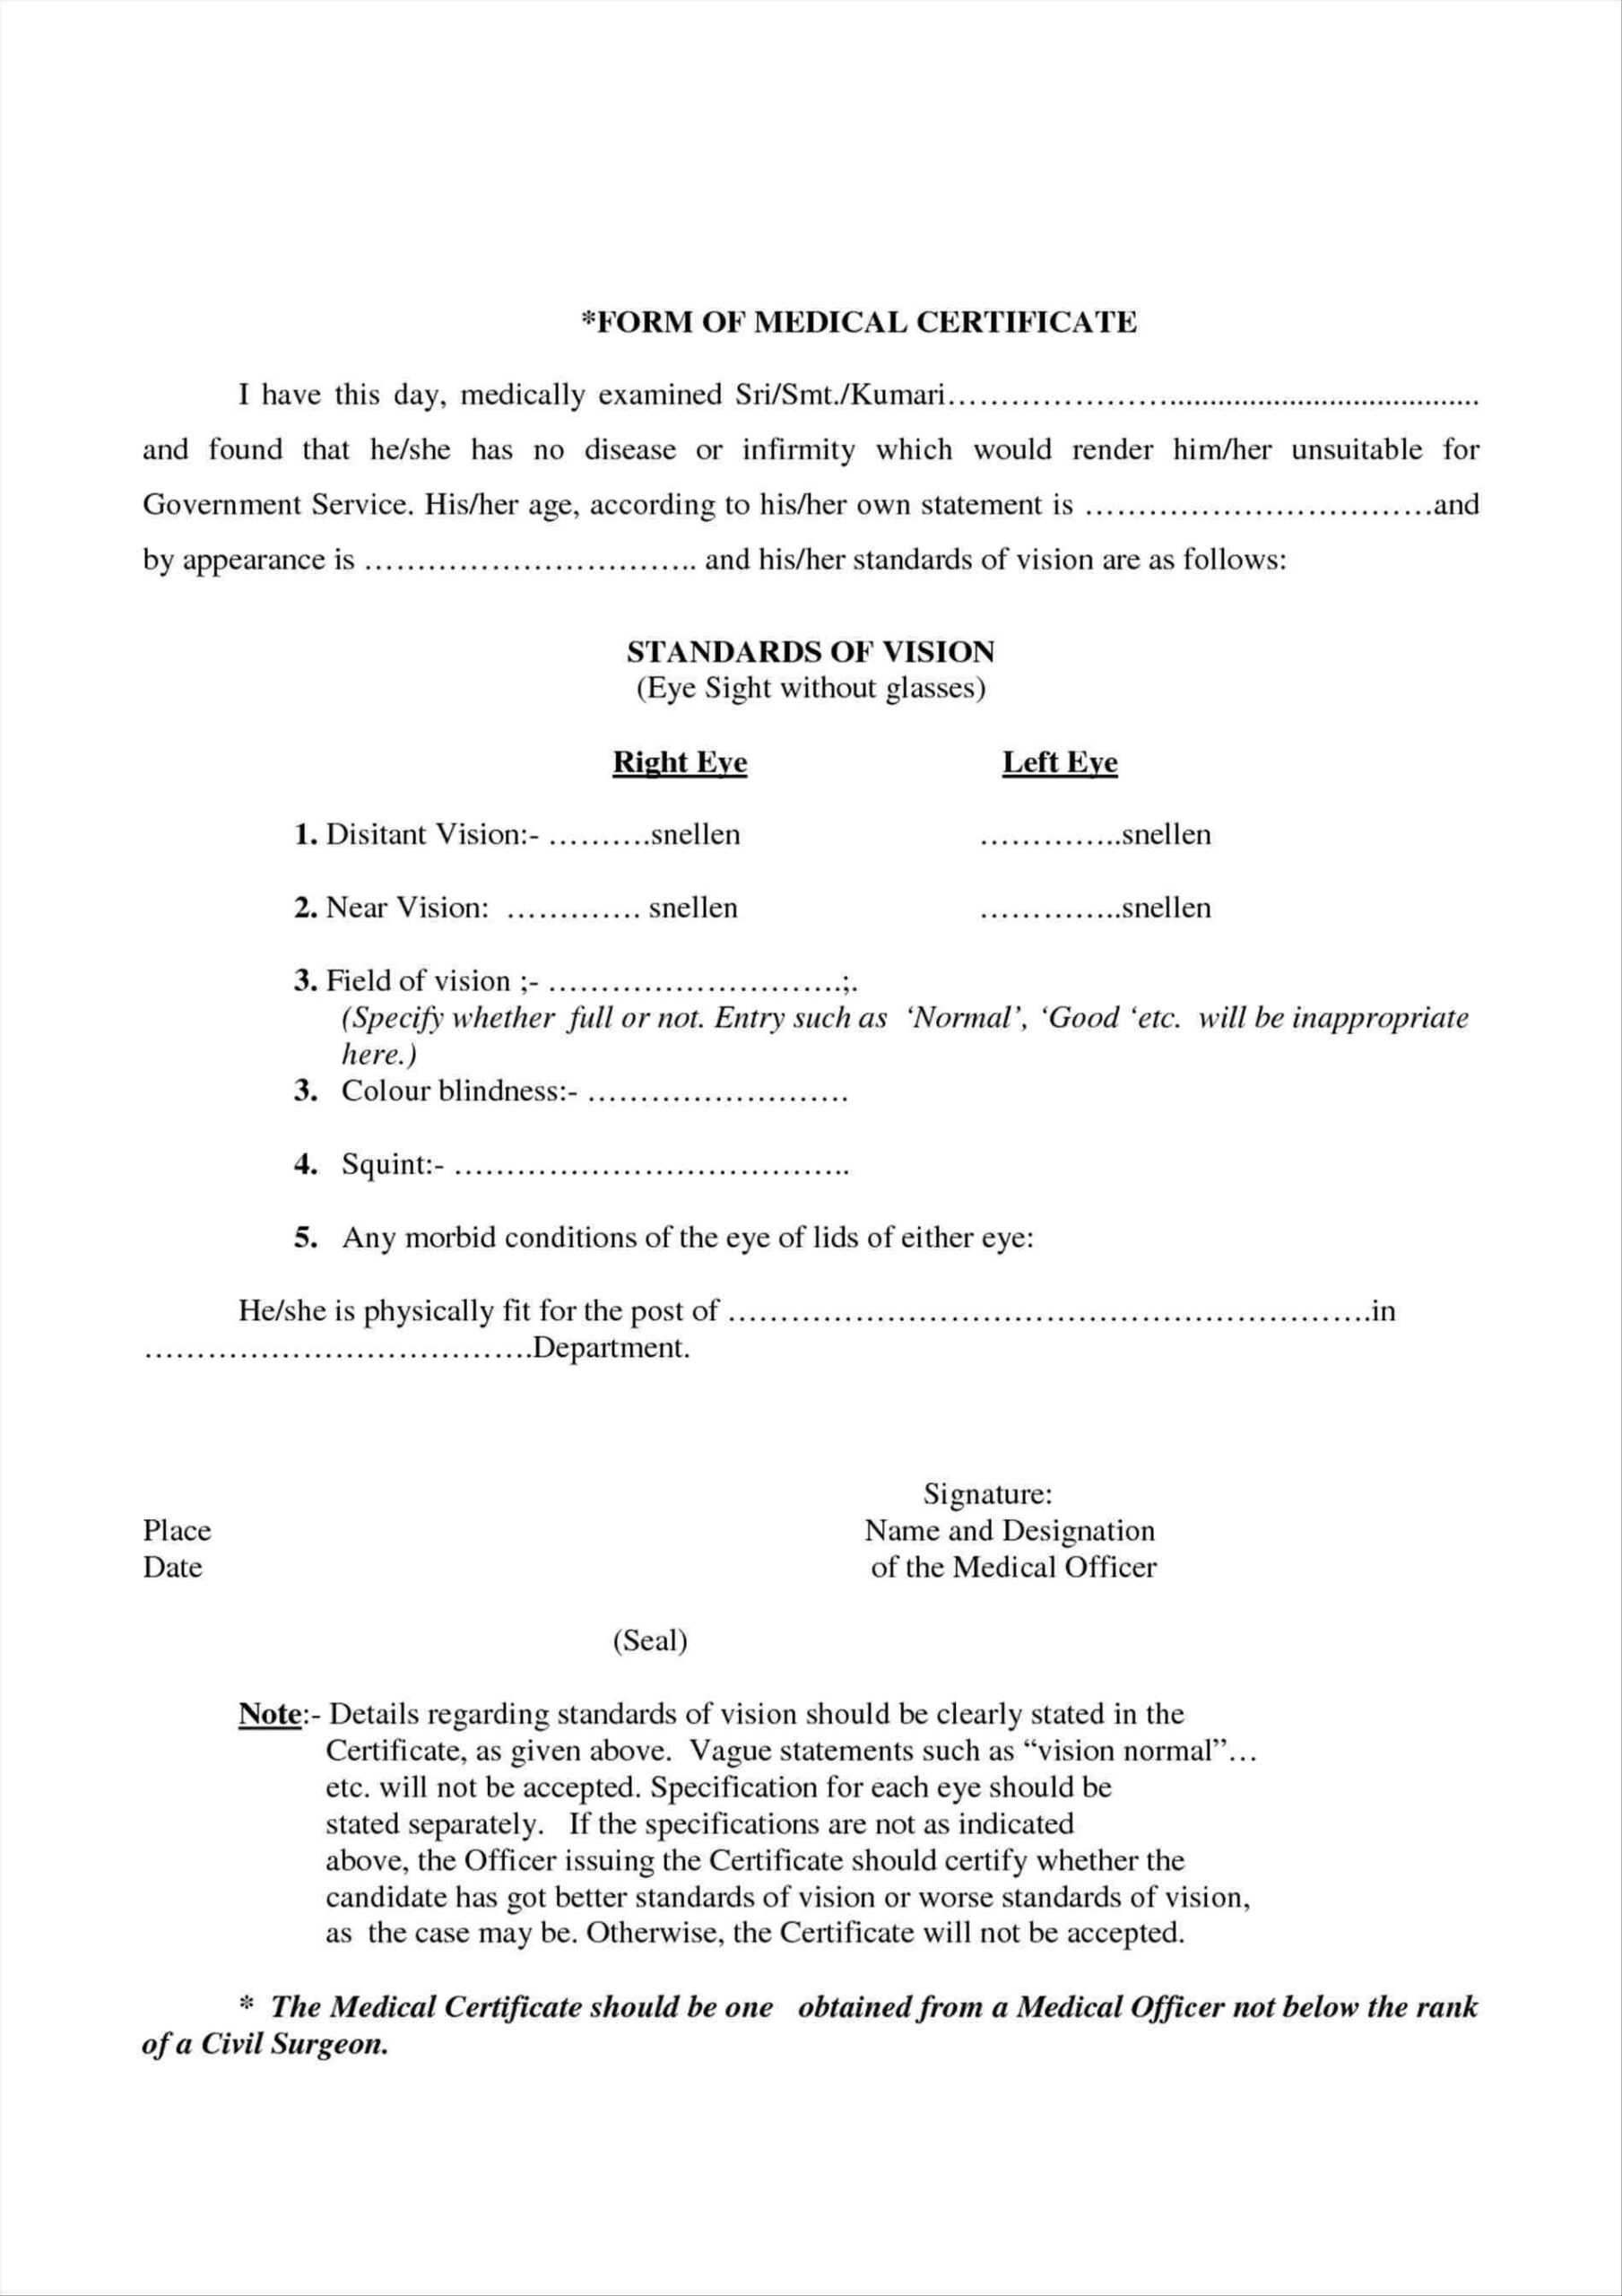 19+ Medical Certificate Templates For Leave – Pdf, Docs Within Leaving Certificate Template